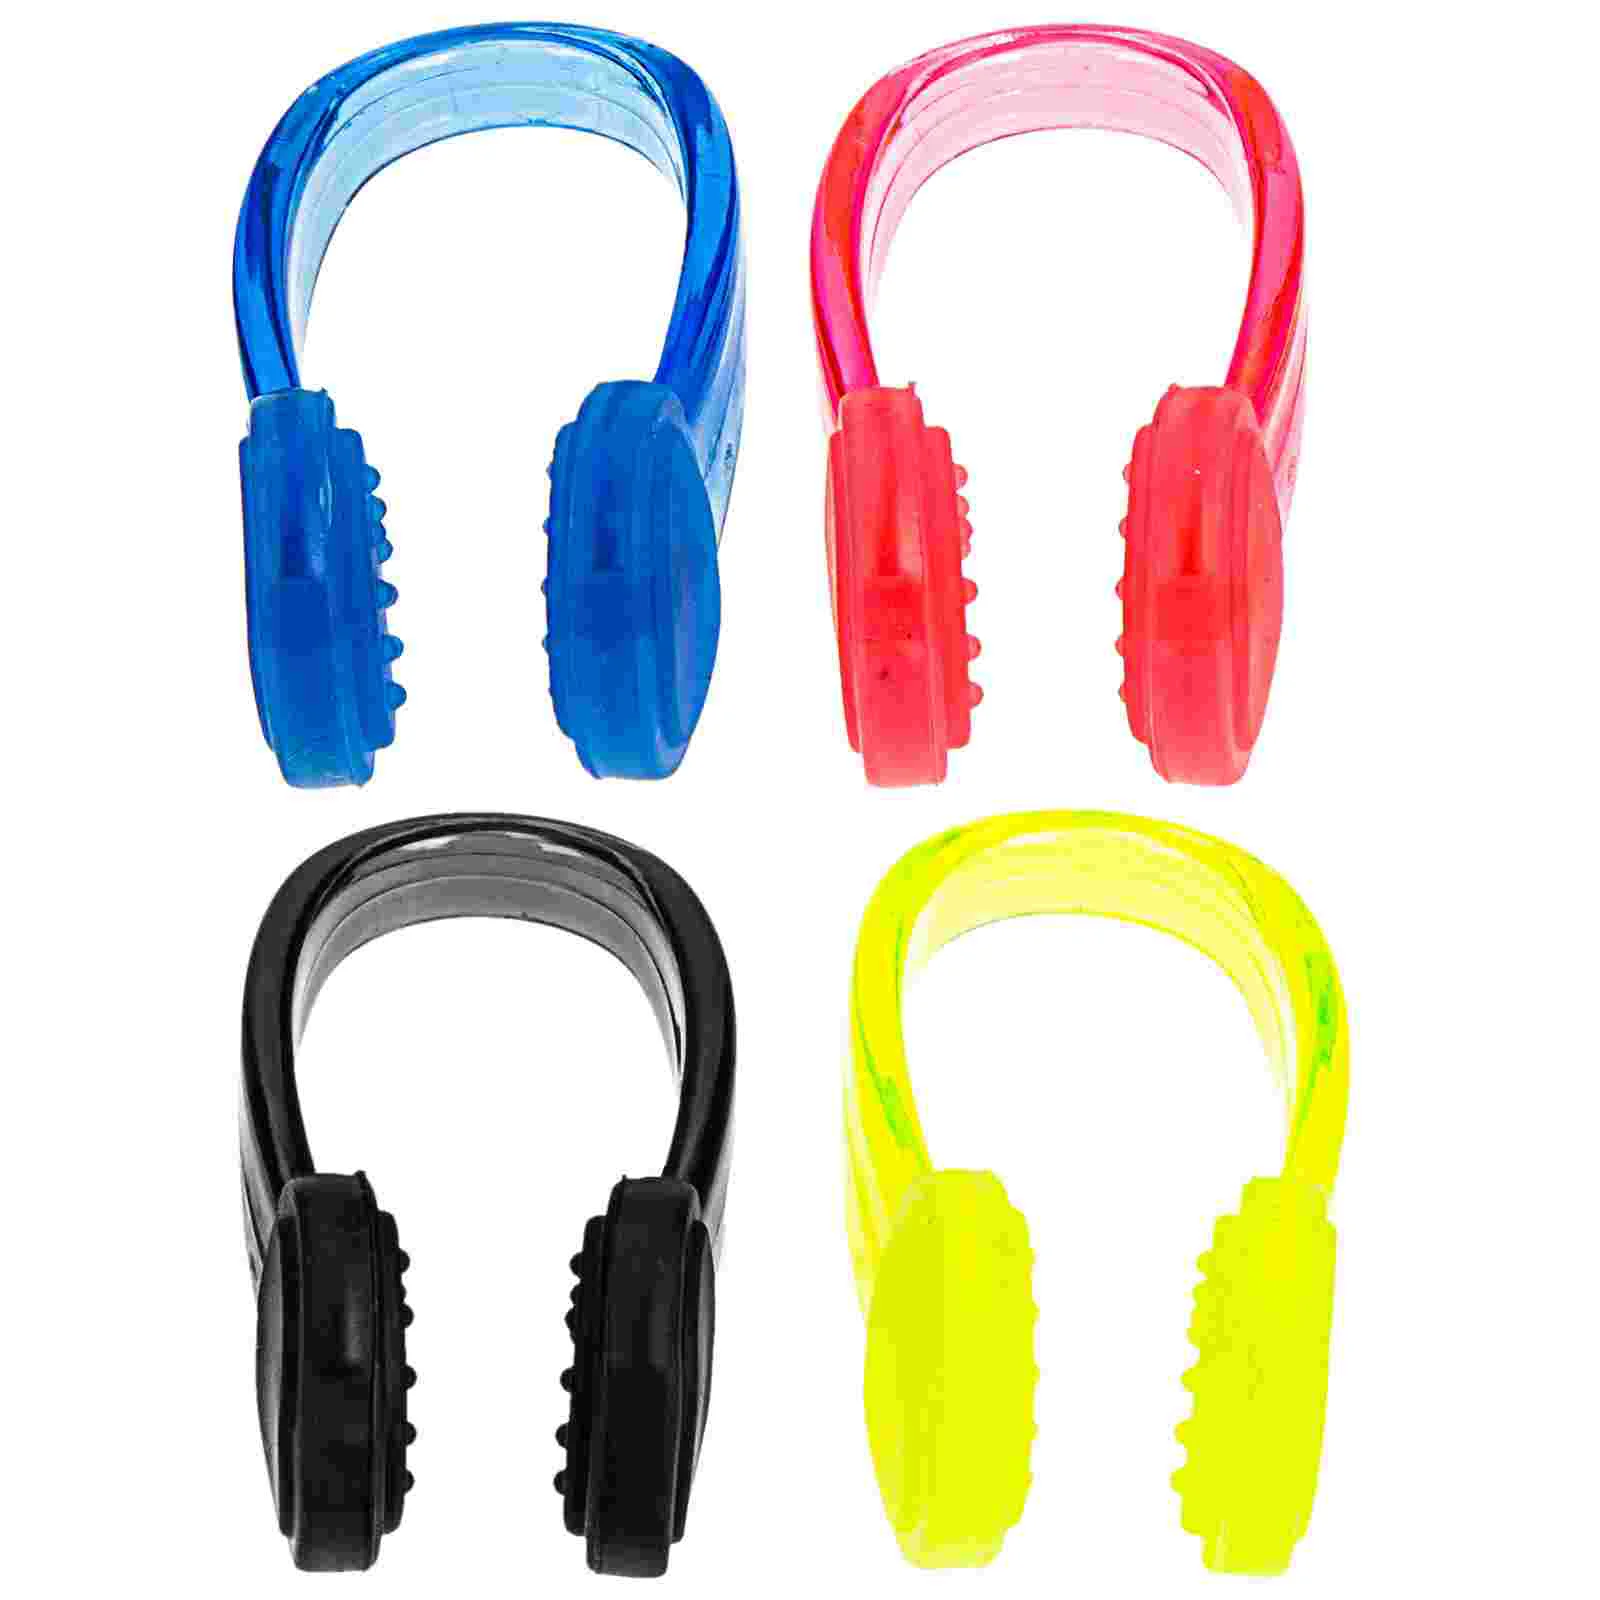 4 Pcs Swimming Nose Clip Convenient Clamps for Clips Silica Gel Wear-resistant Plugs Child Supply Portable